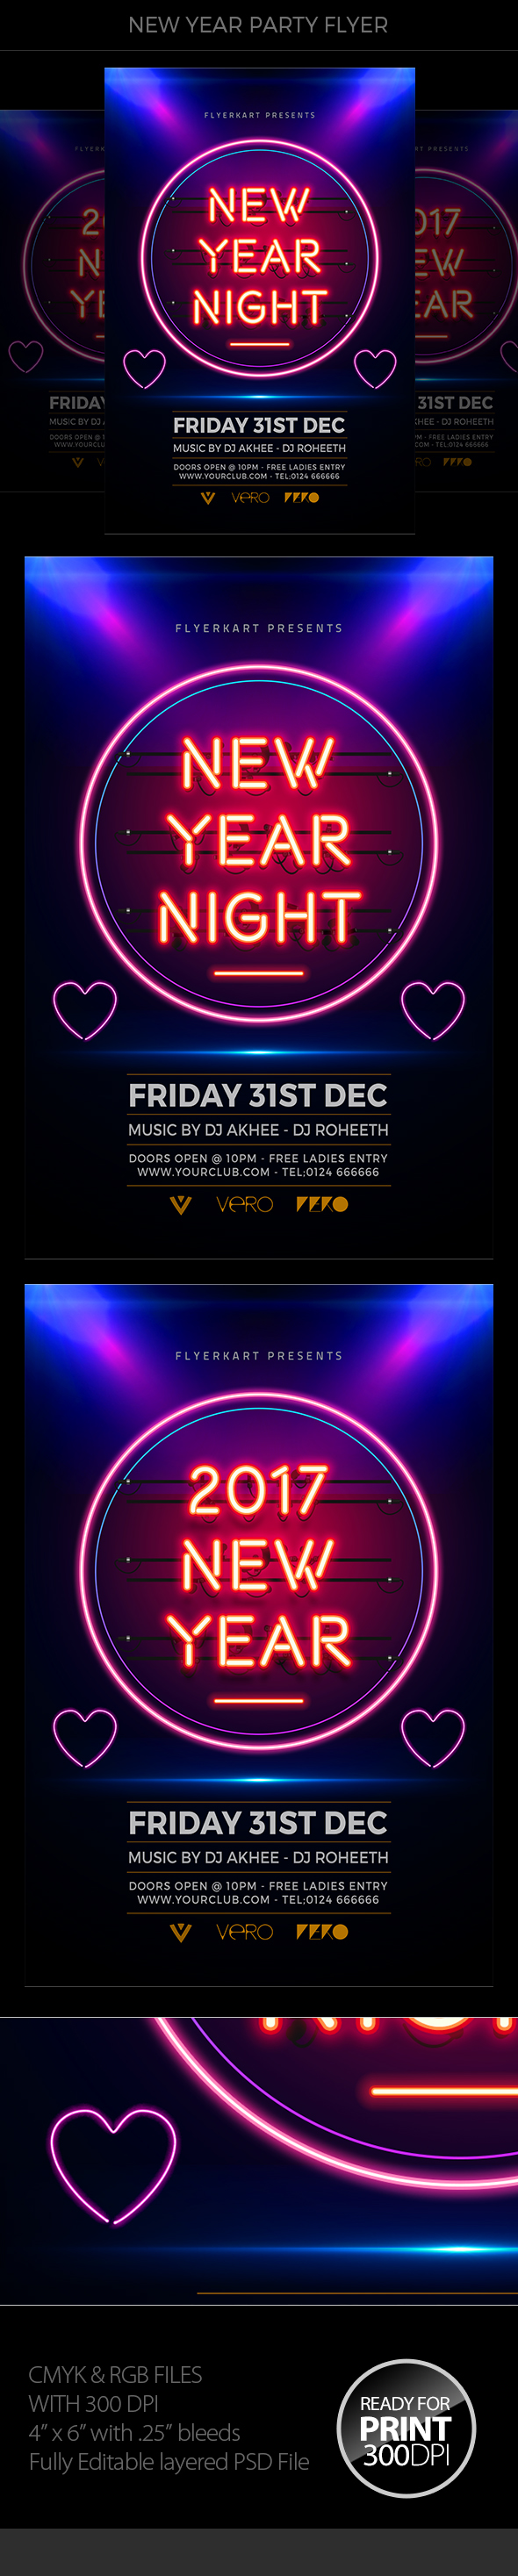 new year 2017 new year bash flyer new year party new year's Eve nightclub Nye nye 2017